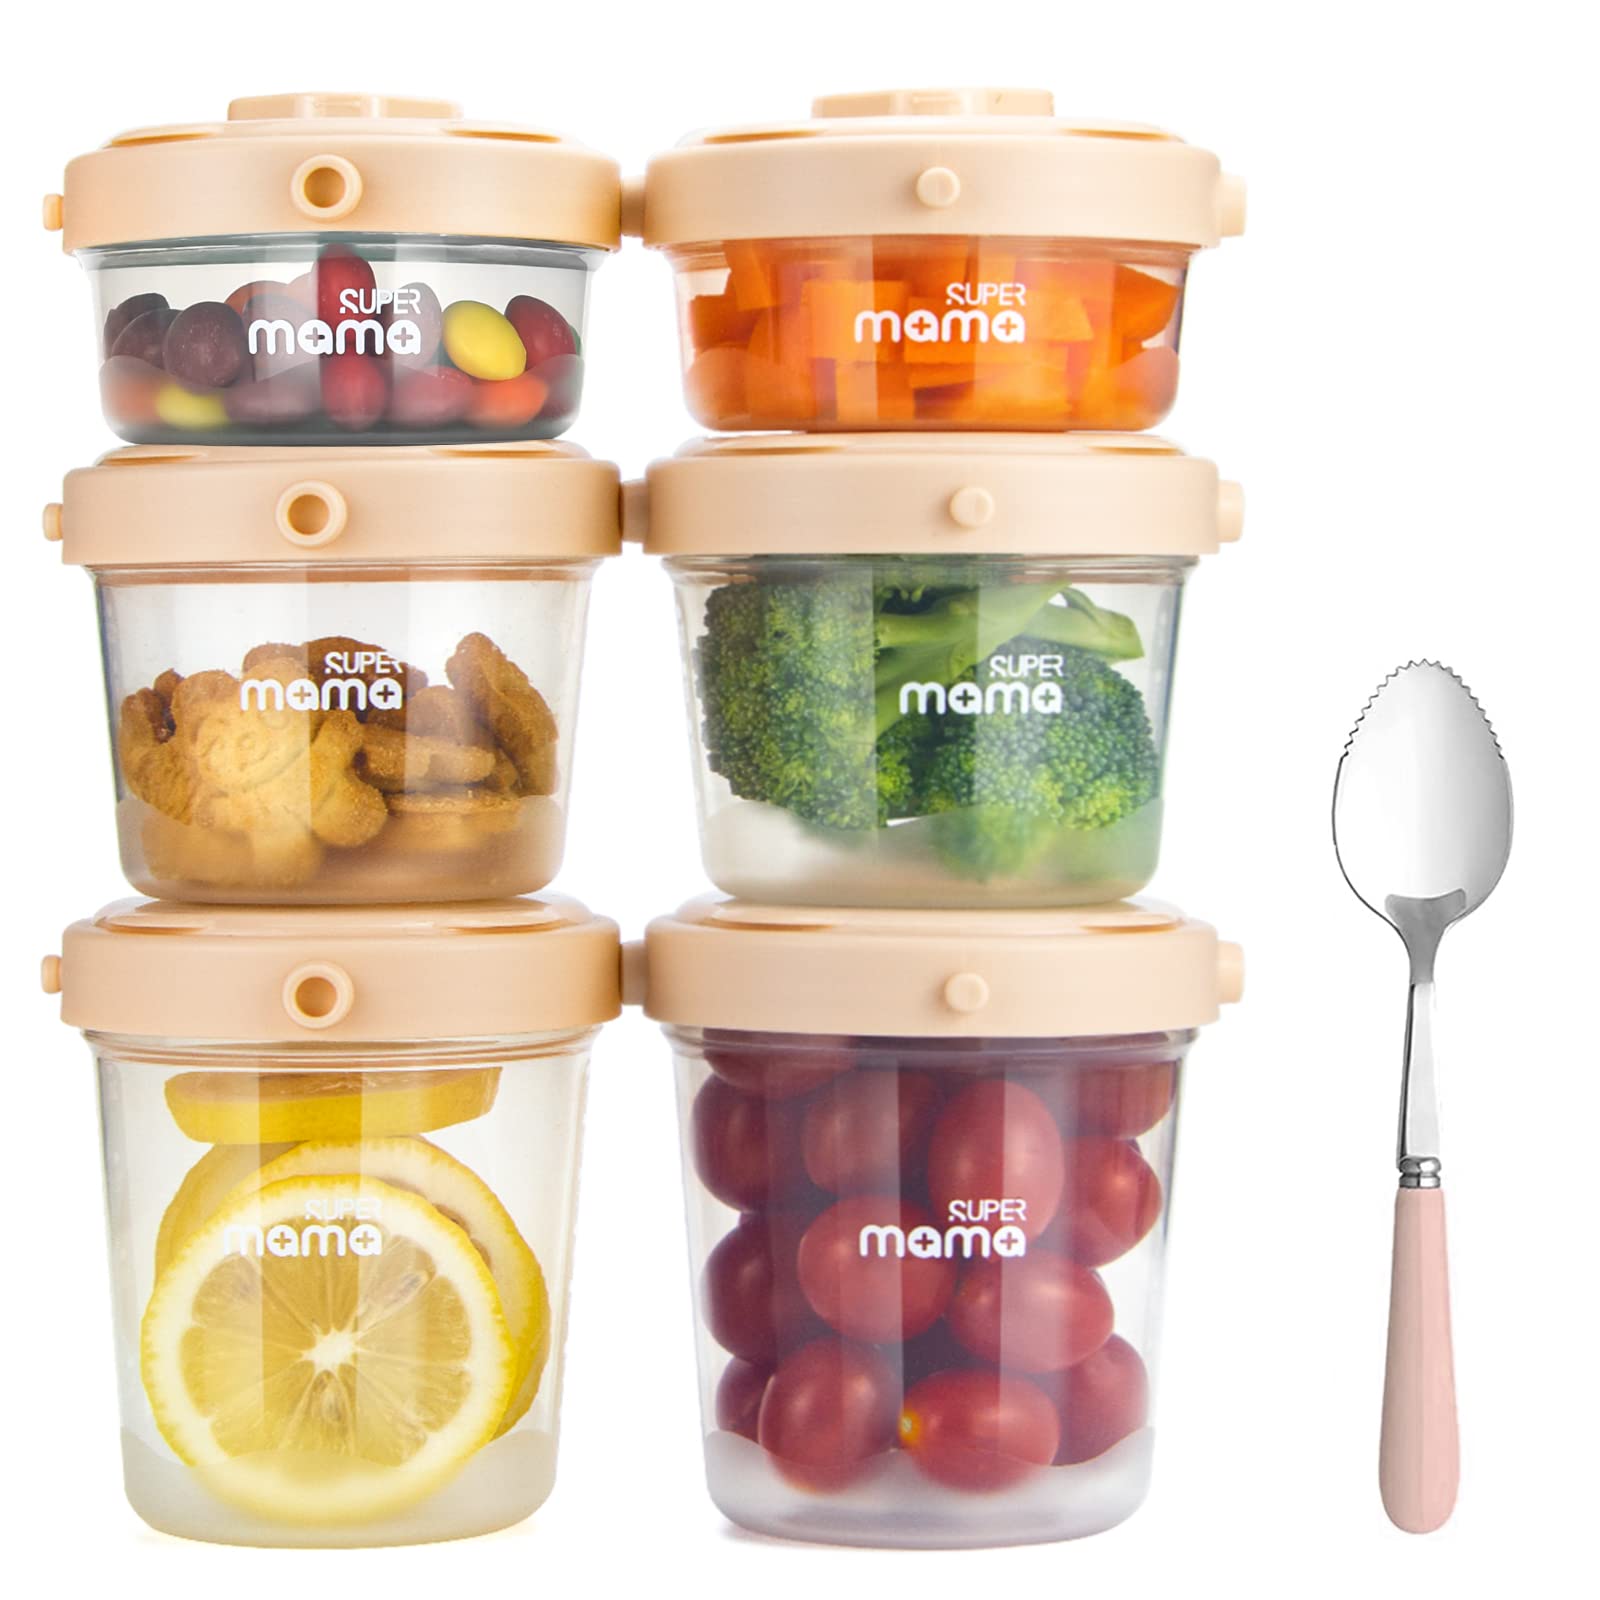 Supermama Baby Food Containers Freezer Safe - 6 Set(247Oz), Baby Food Jars With Lids, Freezer Storage Containers For Baby, Micro